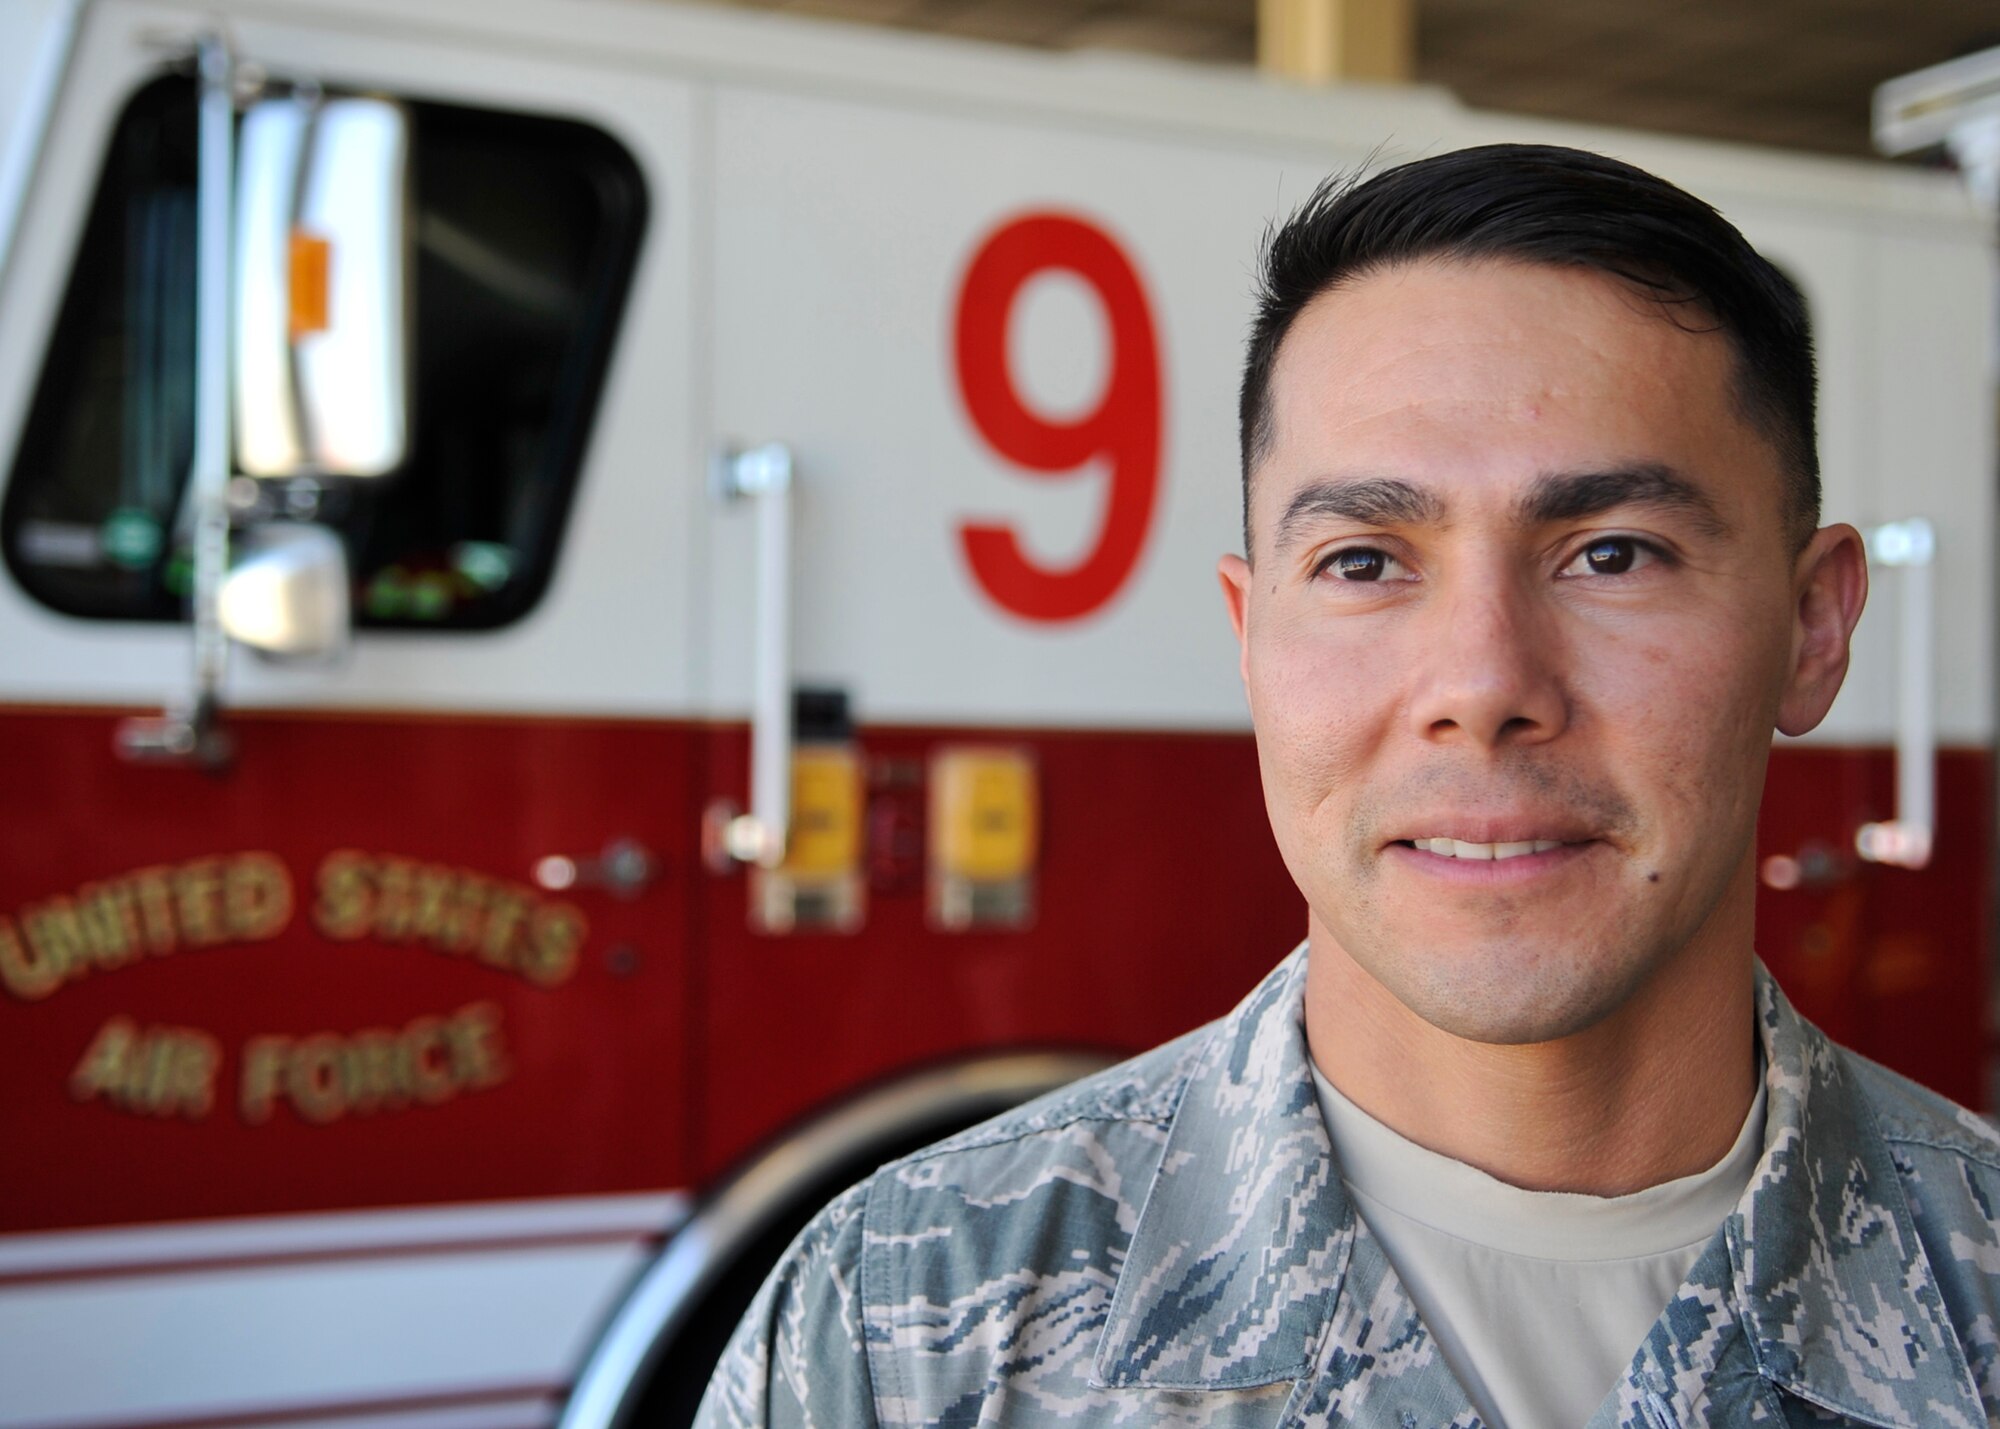 Staff Sgt. Jacob Banuelos, 325th Civil Engineer Squadron lead firefighter, was chosen to be “shadowed” by the 325th Fighter Wing commander April 8 as part of the Airman Shadow Program. This program allows the base commander to shadow one Airman a month to get a better understanding of different job duties around the base. (U.S. Air Force photo by Senior Airman Sergio A. Gamboa/Released)